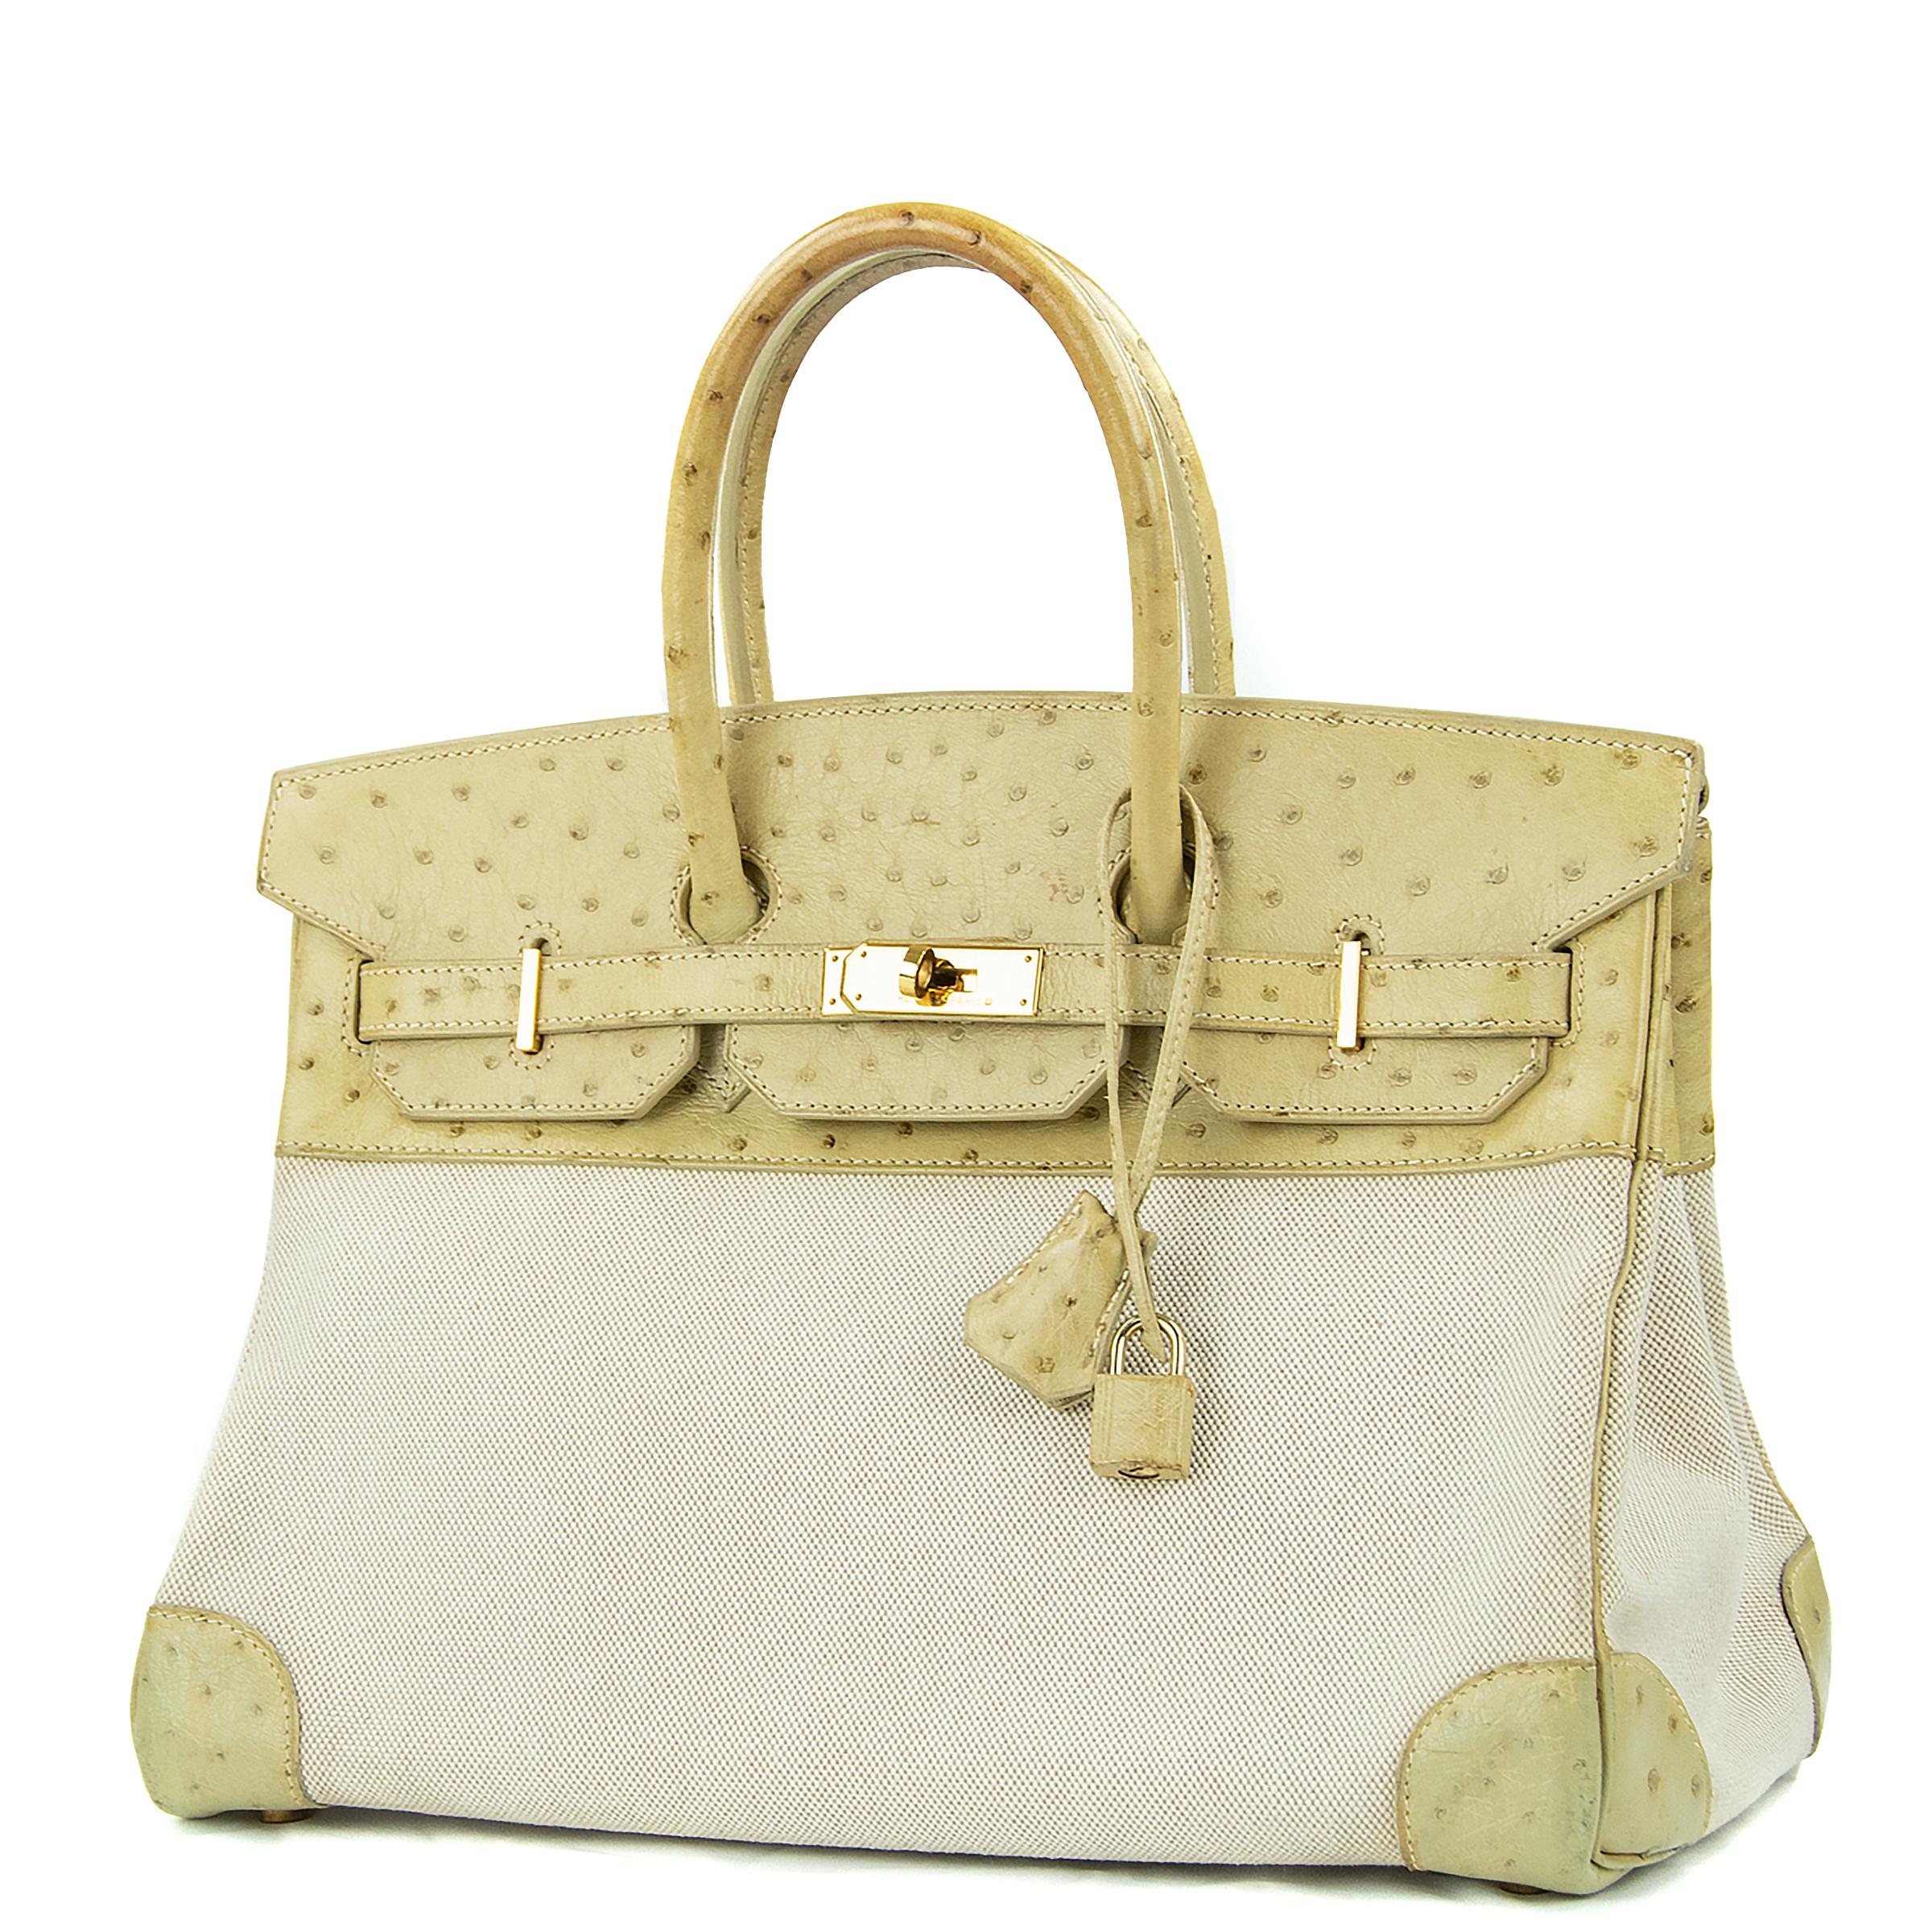 Hermes 35cm Birkin in Toile & Blanc Casse Ostrich. This iconic special order Hermes Birkin bag is timeless and chic. Fresh and crisp with gold hardware.

    Condition: Excellent, Previously Owned
    Made in France
    Bag Measures: 35cm (13.8